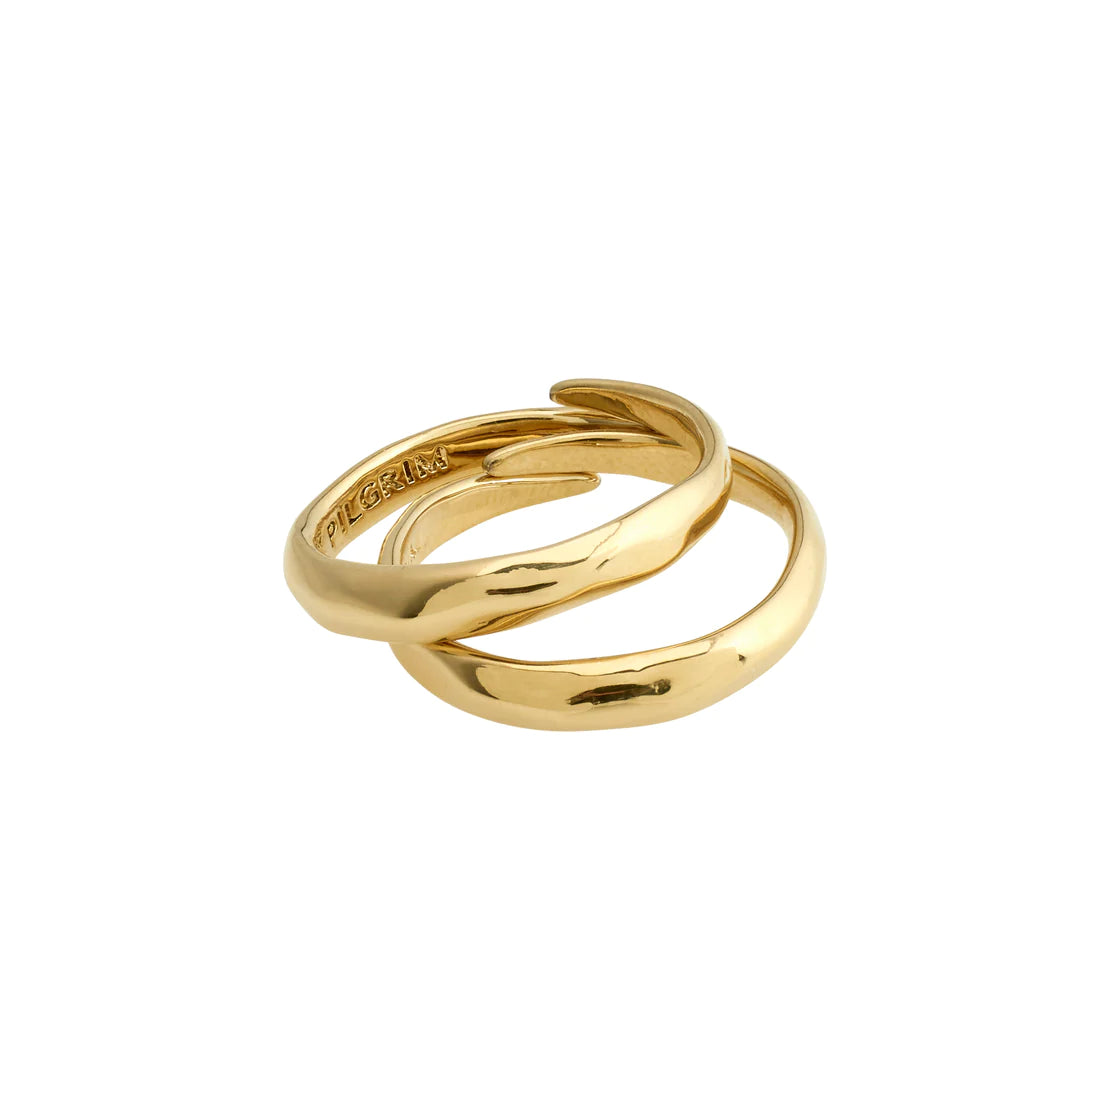 ADDISON RECYCLED RING 2-IN-1 SET GOLD PLATED